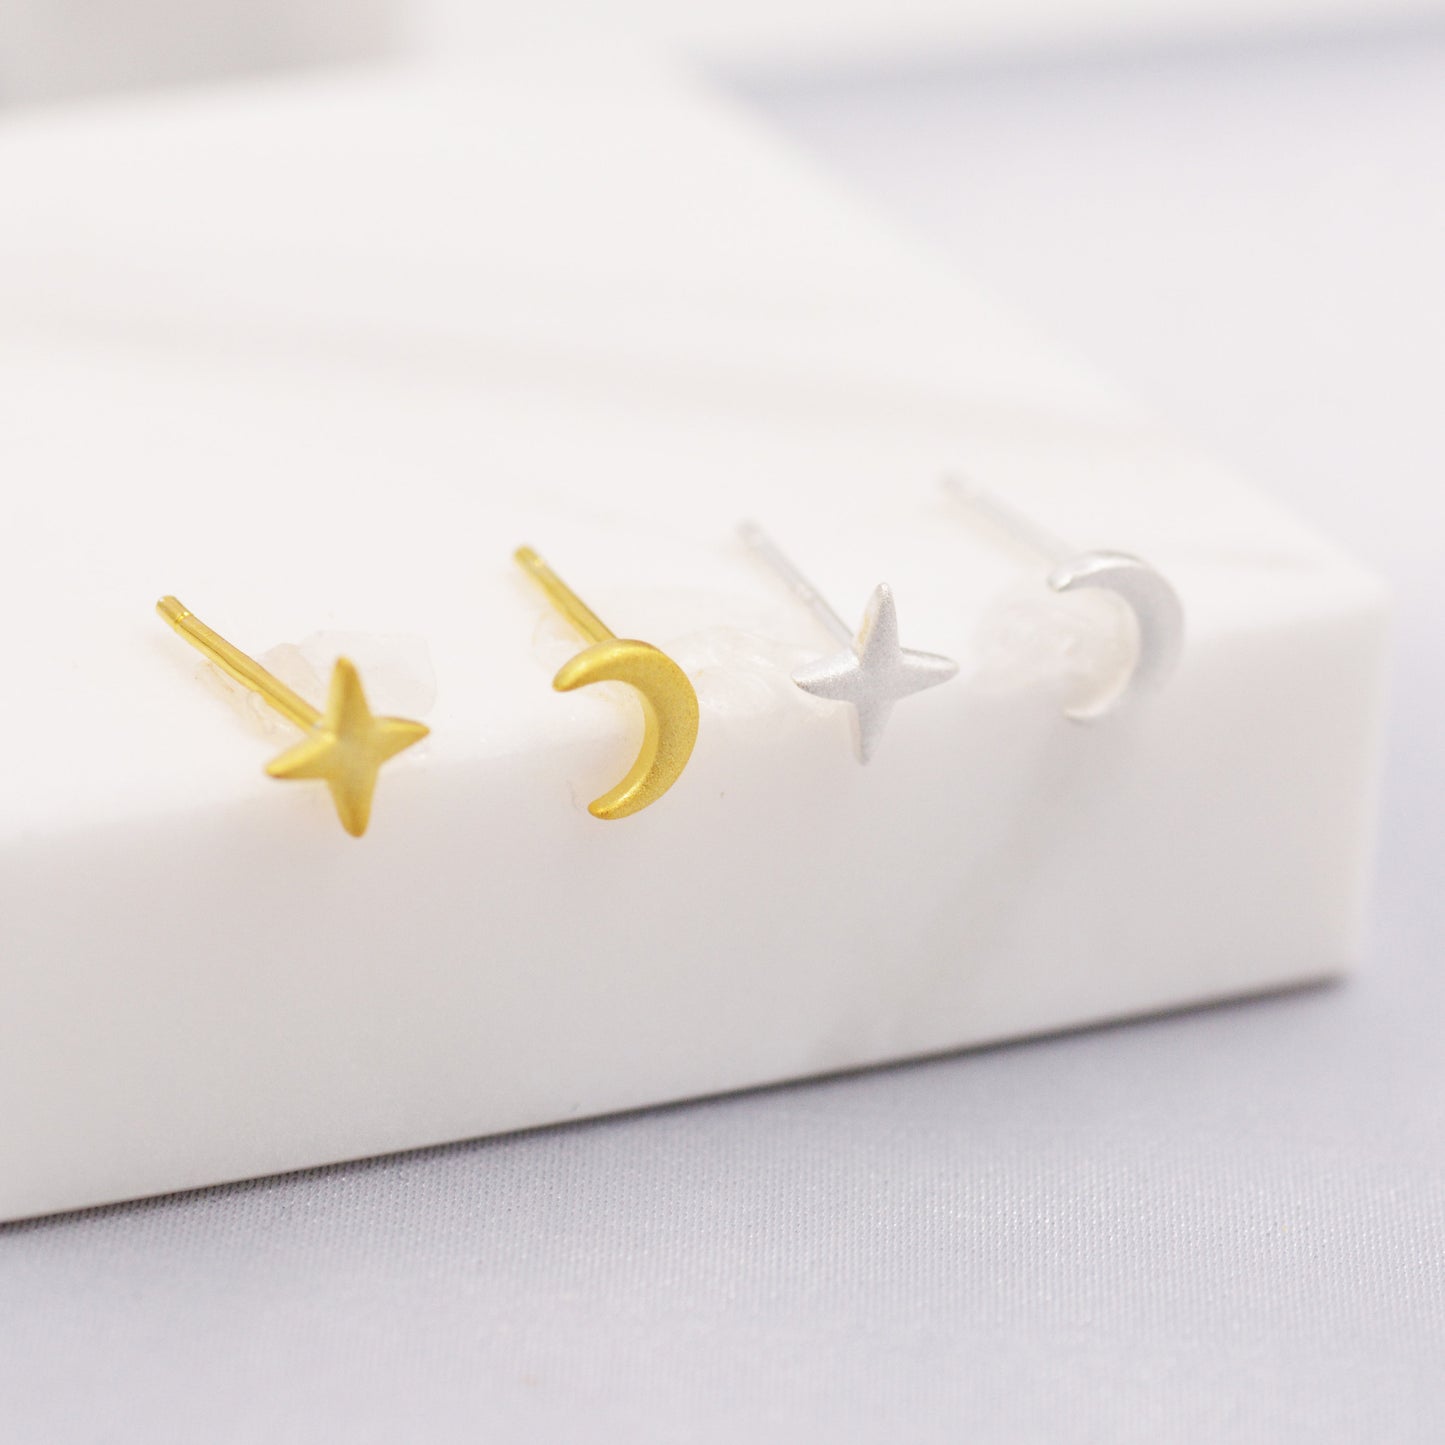 Mismatched Four Point Star and Moon Stud Earrings in Sterling Silver, Crescent Moon Celestial Stud, Polished or Textured, Gold or Silver